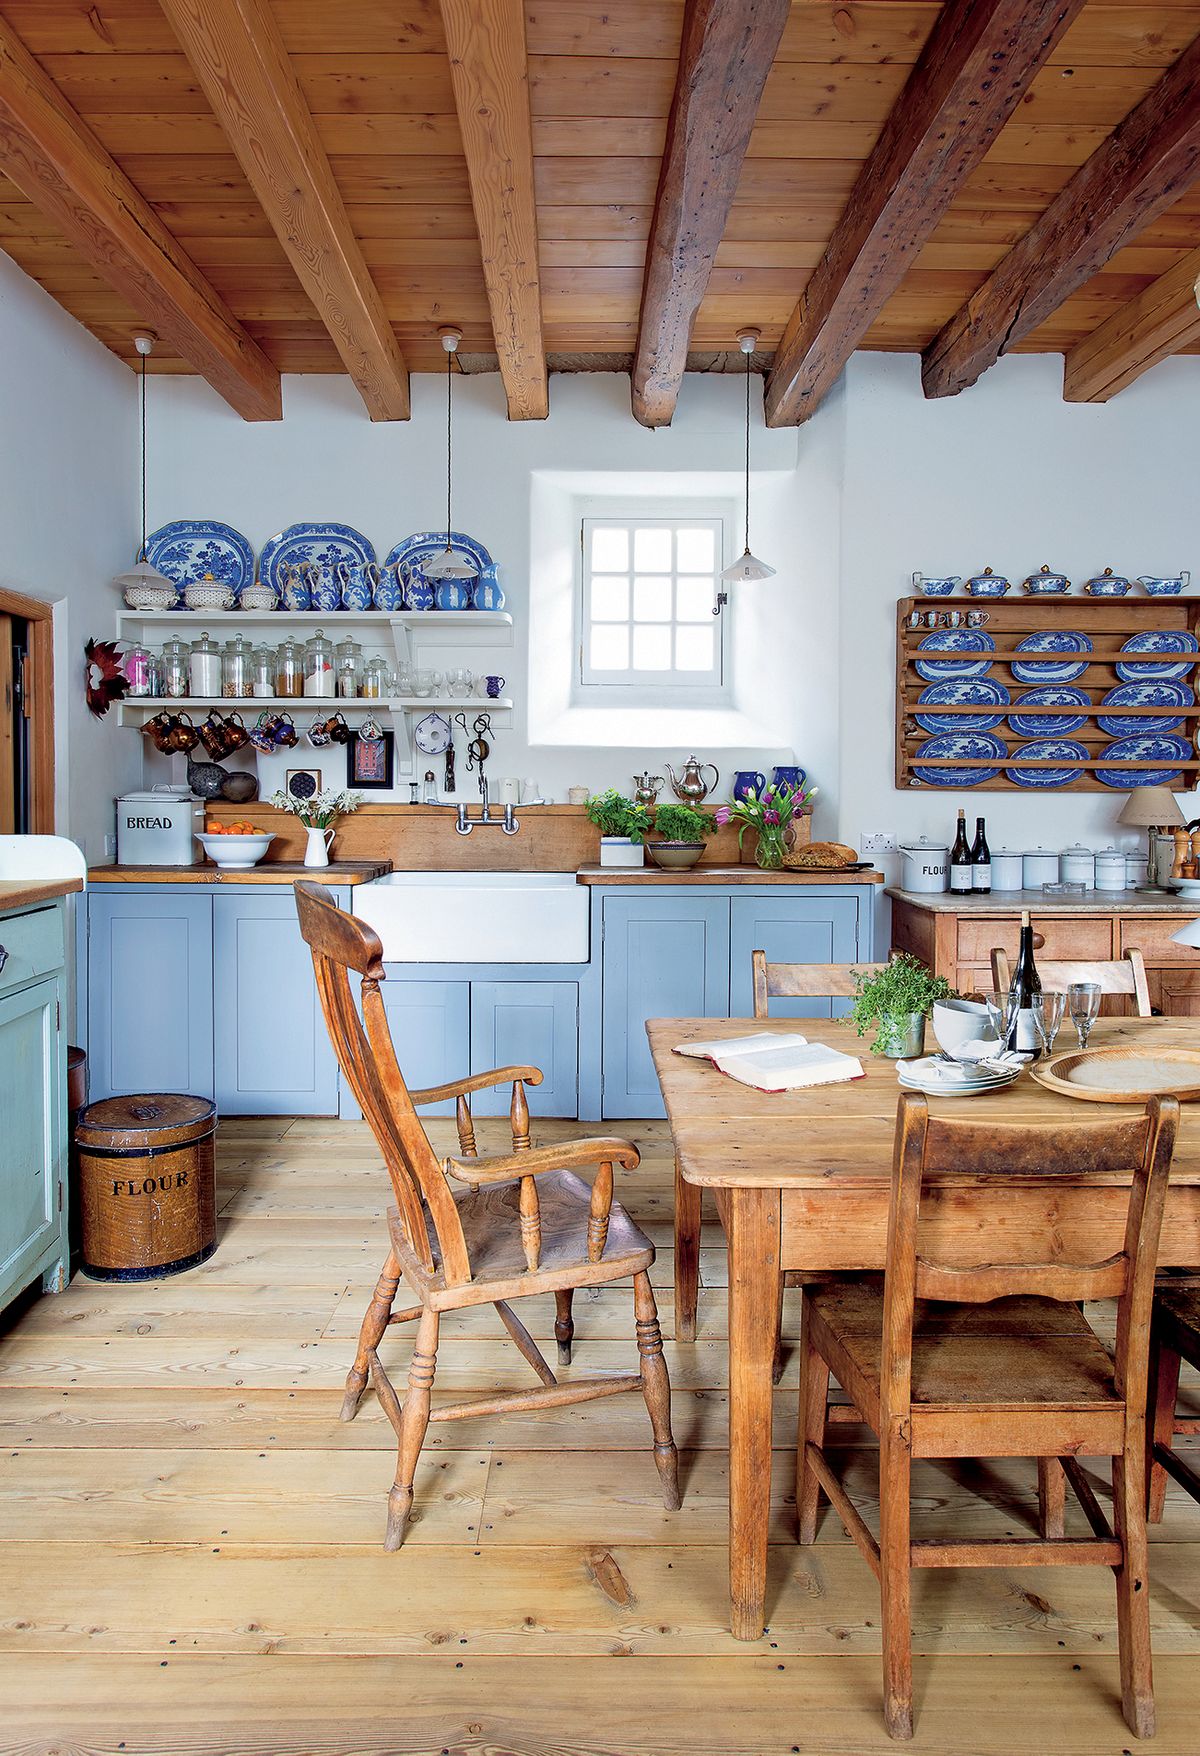 How to design a traditional kitchen | Real Homes